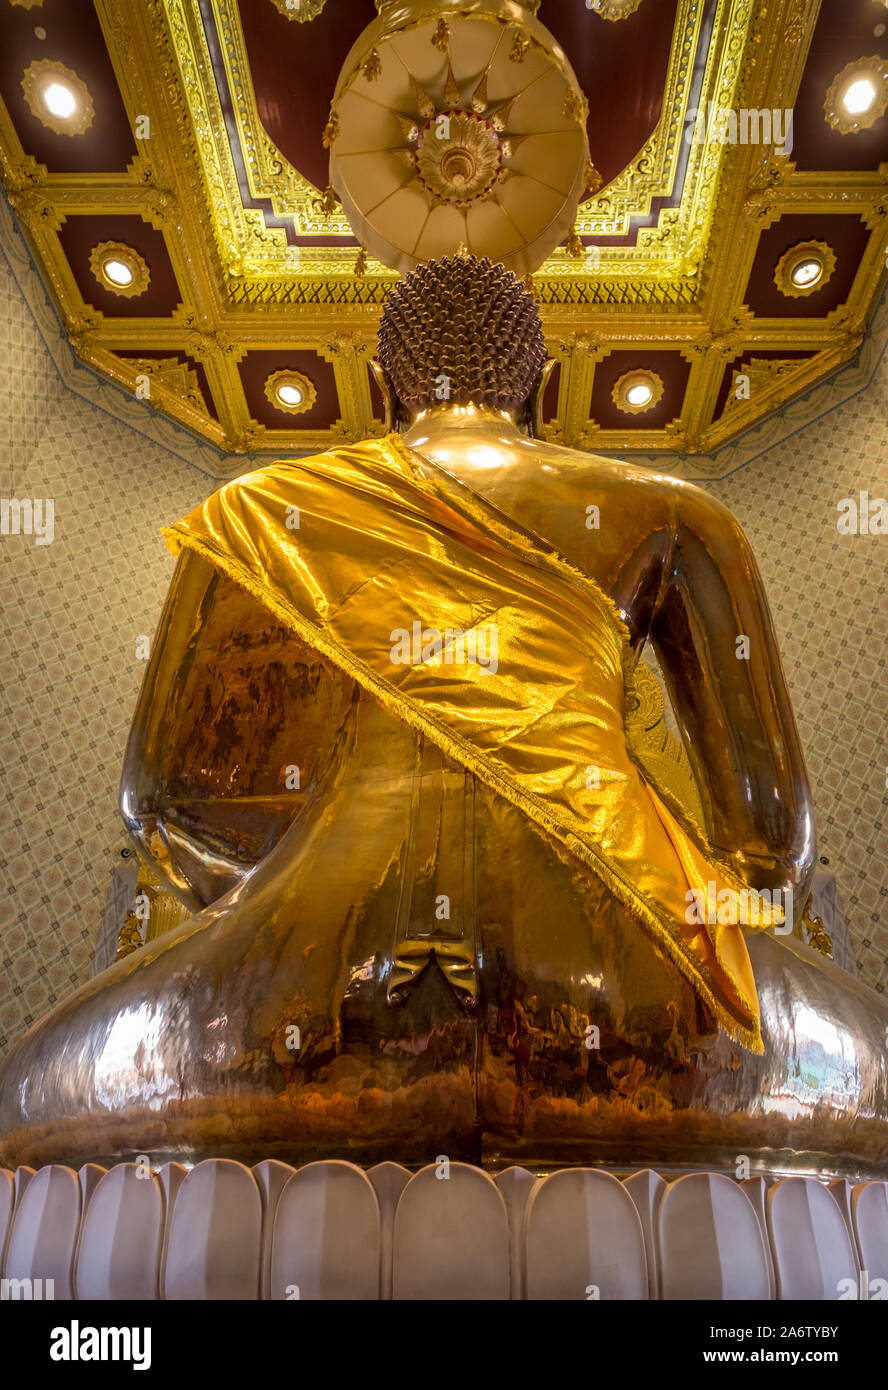 The Golden Buddha, or Wat Traimit in Bangkok, Thailand. This is the biggest pure golden Buddha statue in the world. Stock Photo